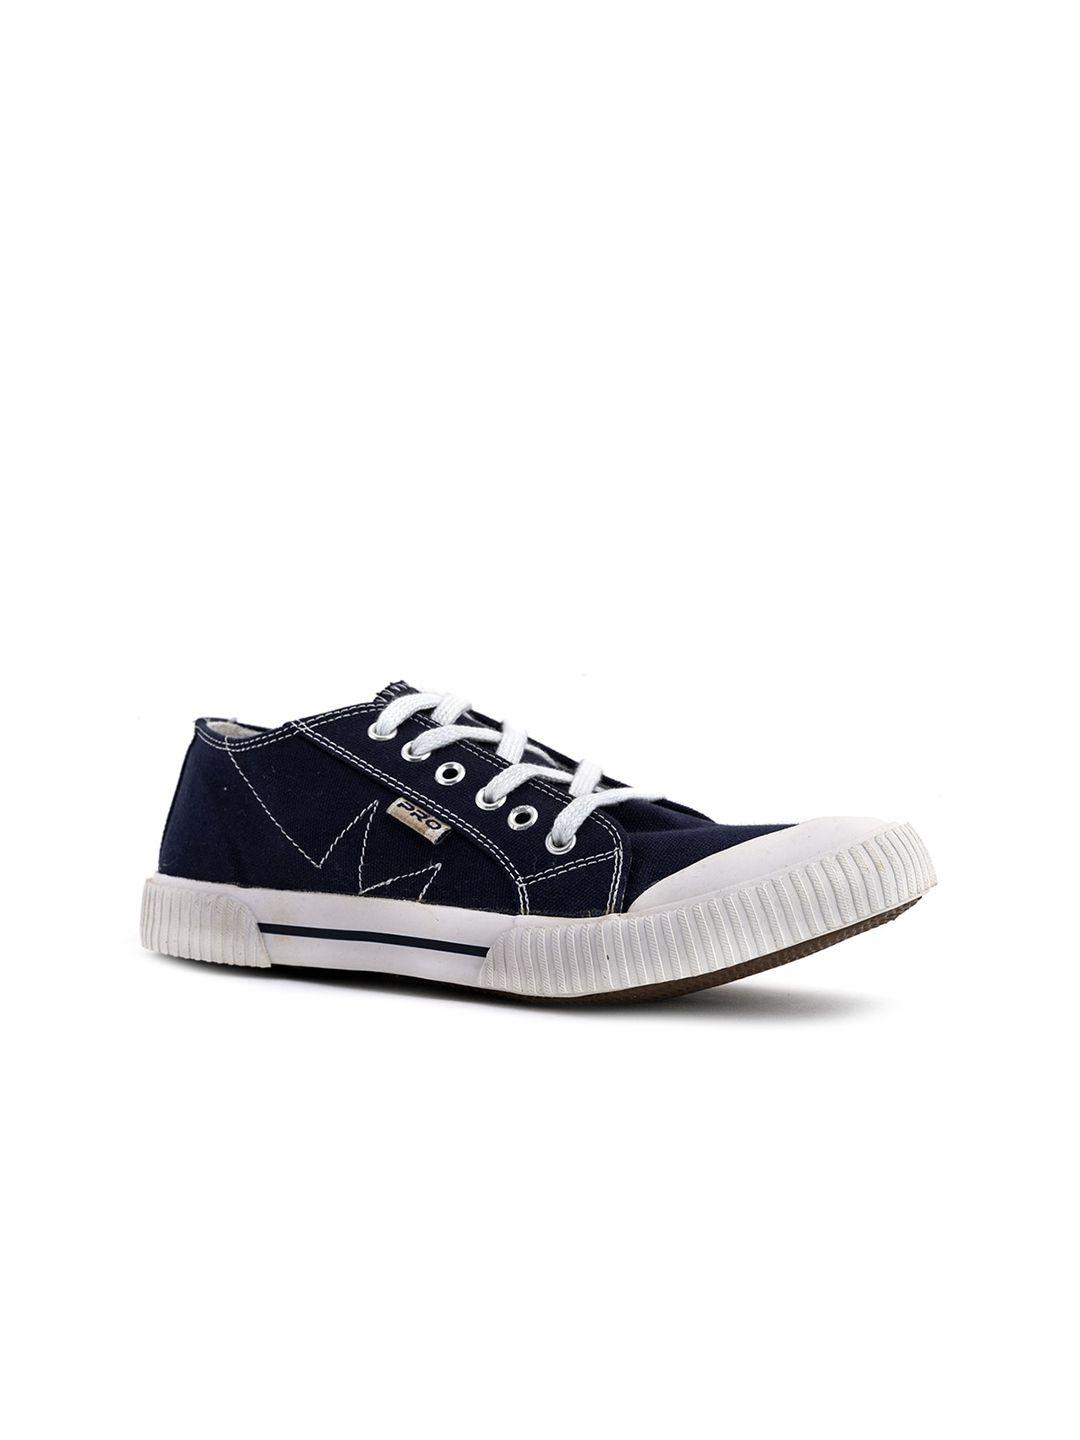 khadims-women-blue-solid-lace-up-sneakers